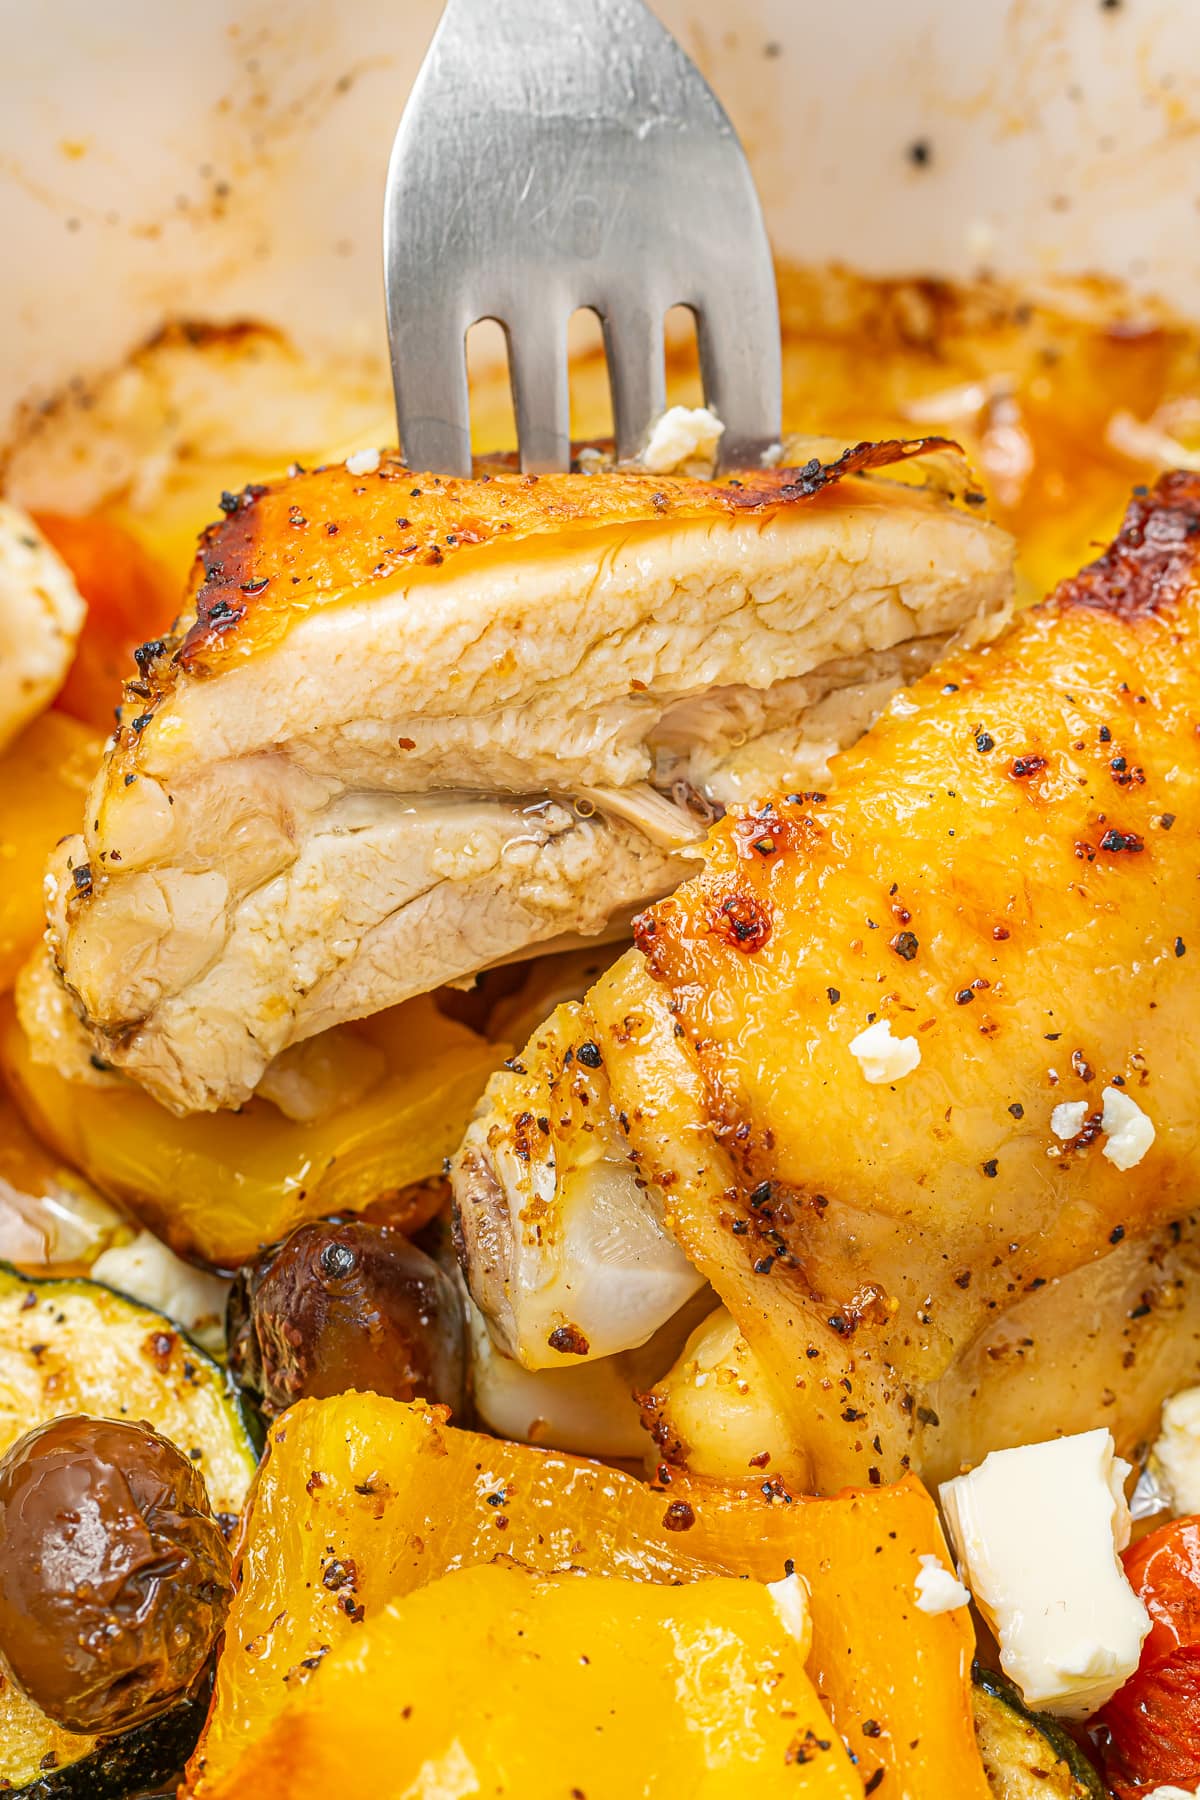 A close-up of a fork cutting into a tender piece of roasted Greek chicken, surrounded by colorful roasted vegetables and feta cheese.